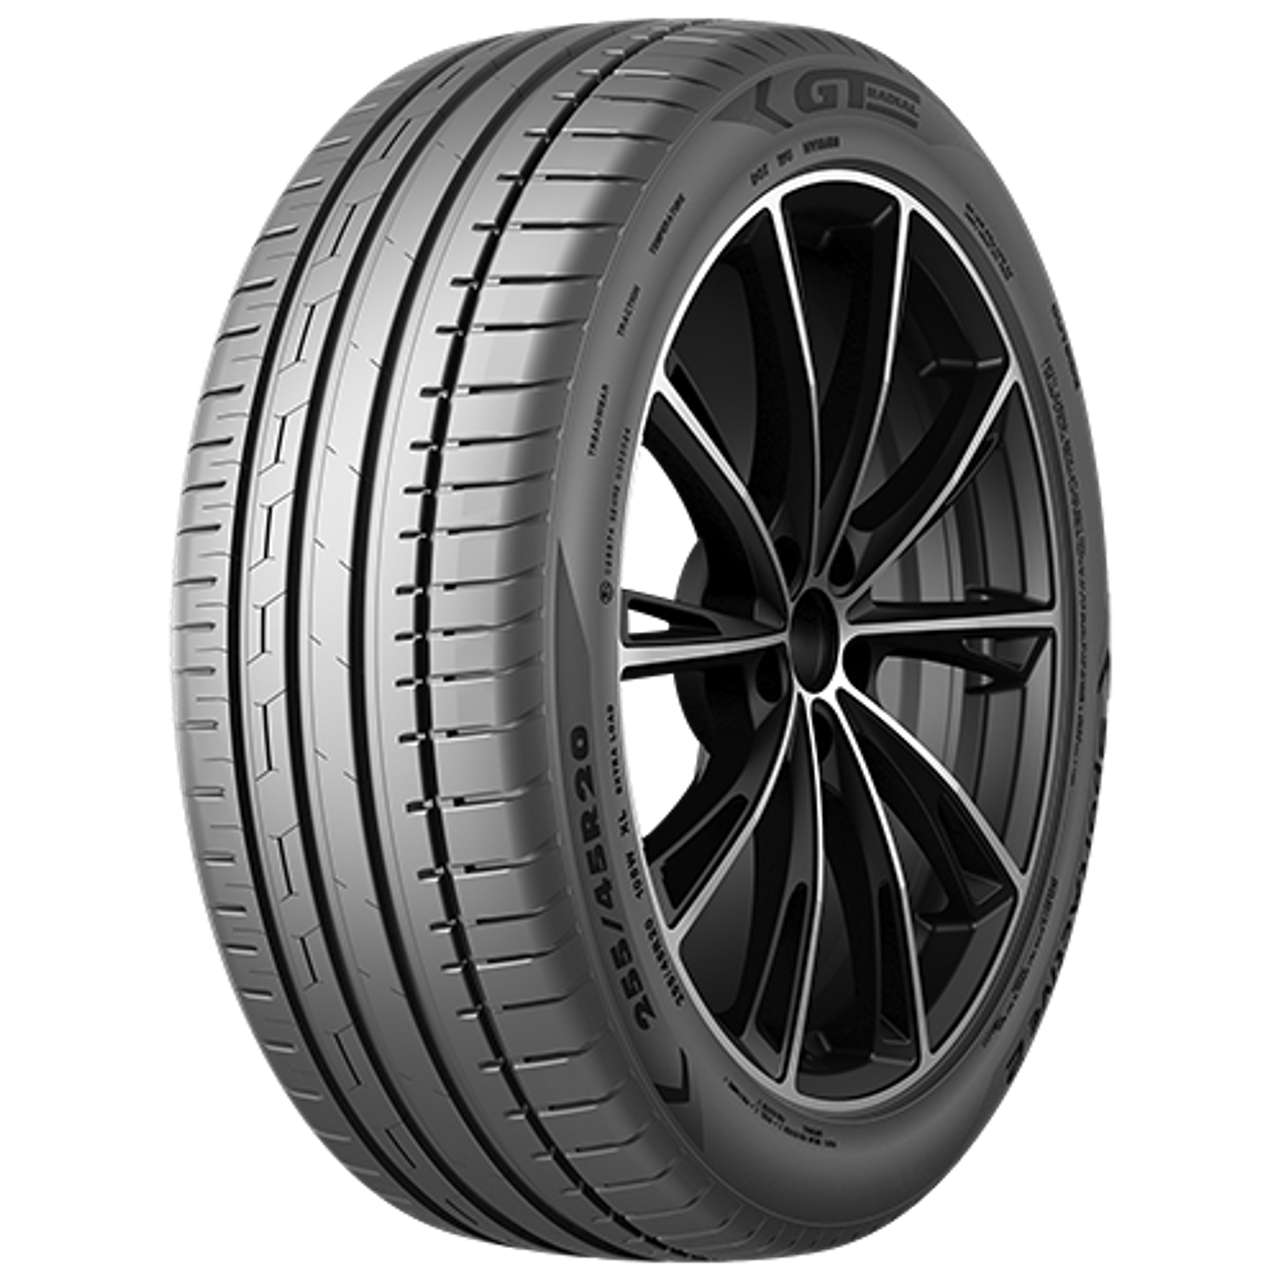 GT-RADIAL SPORTACTIVE 2 215/40R17 87W BSW